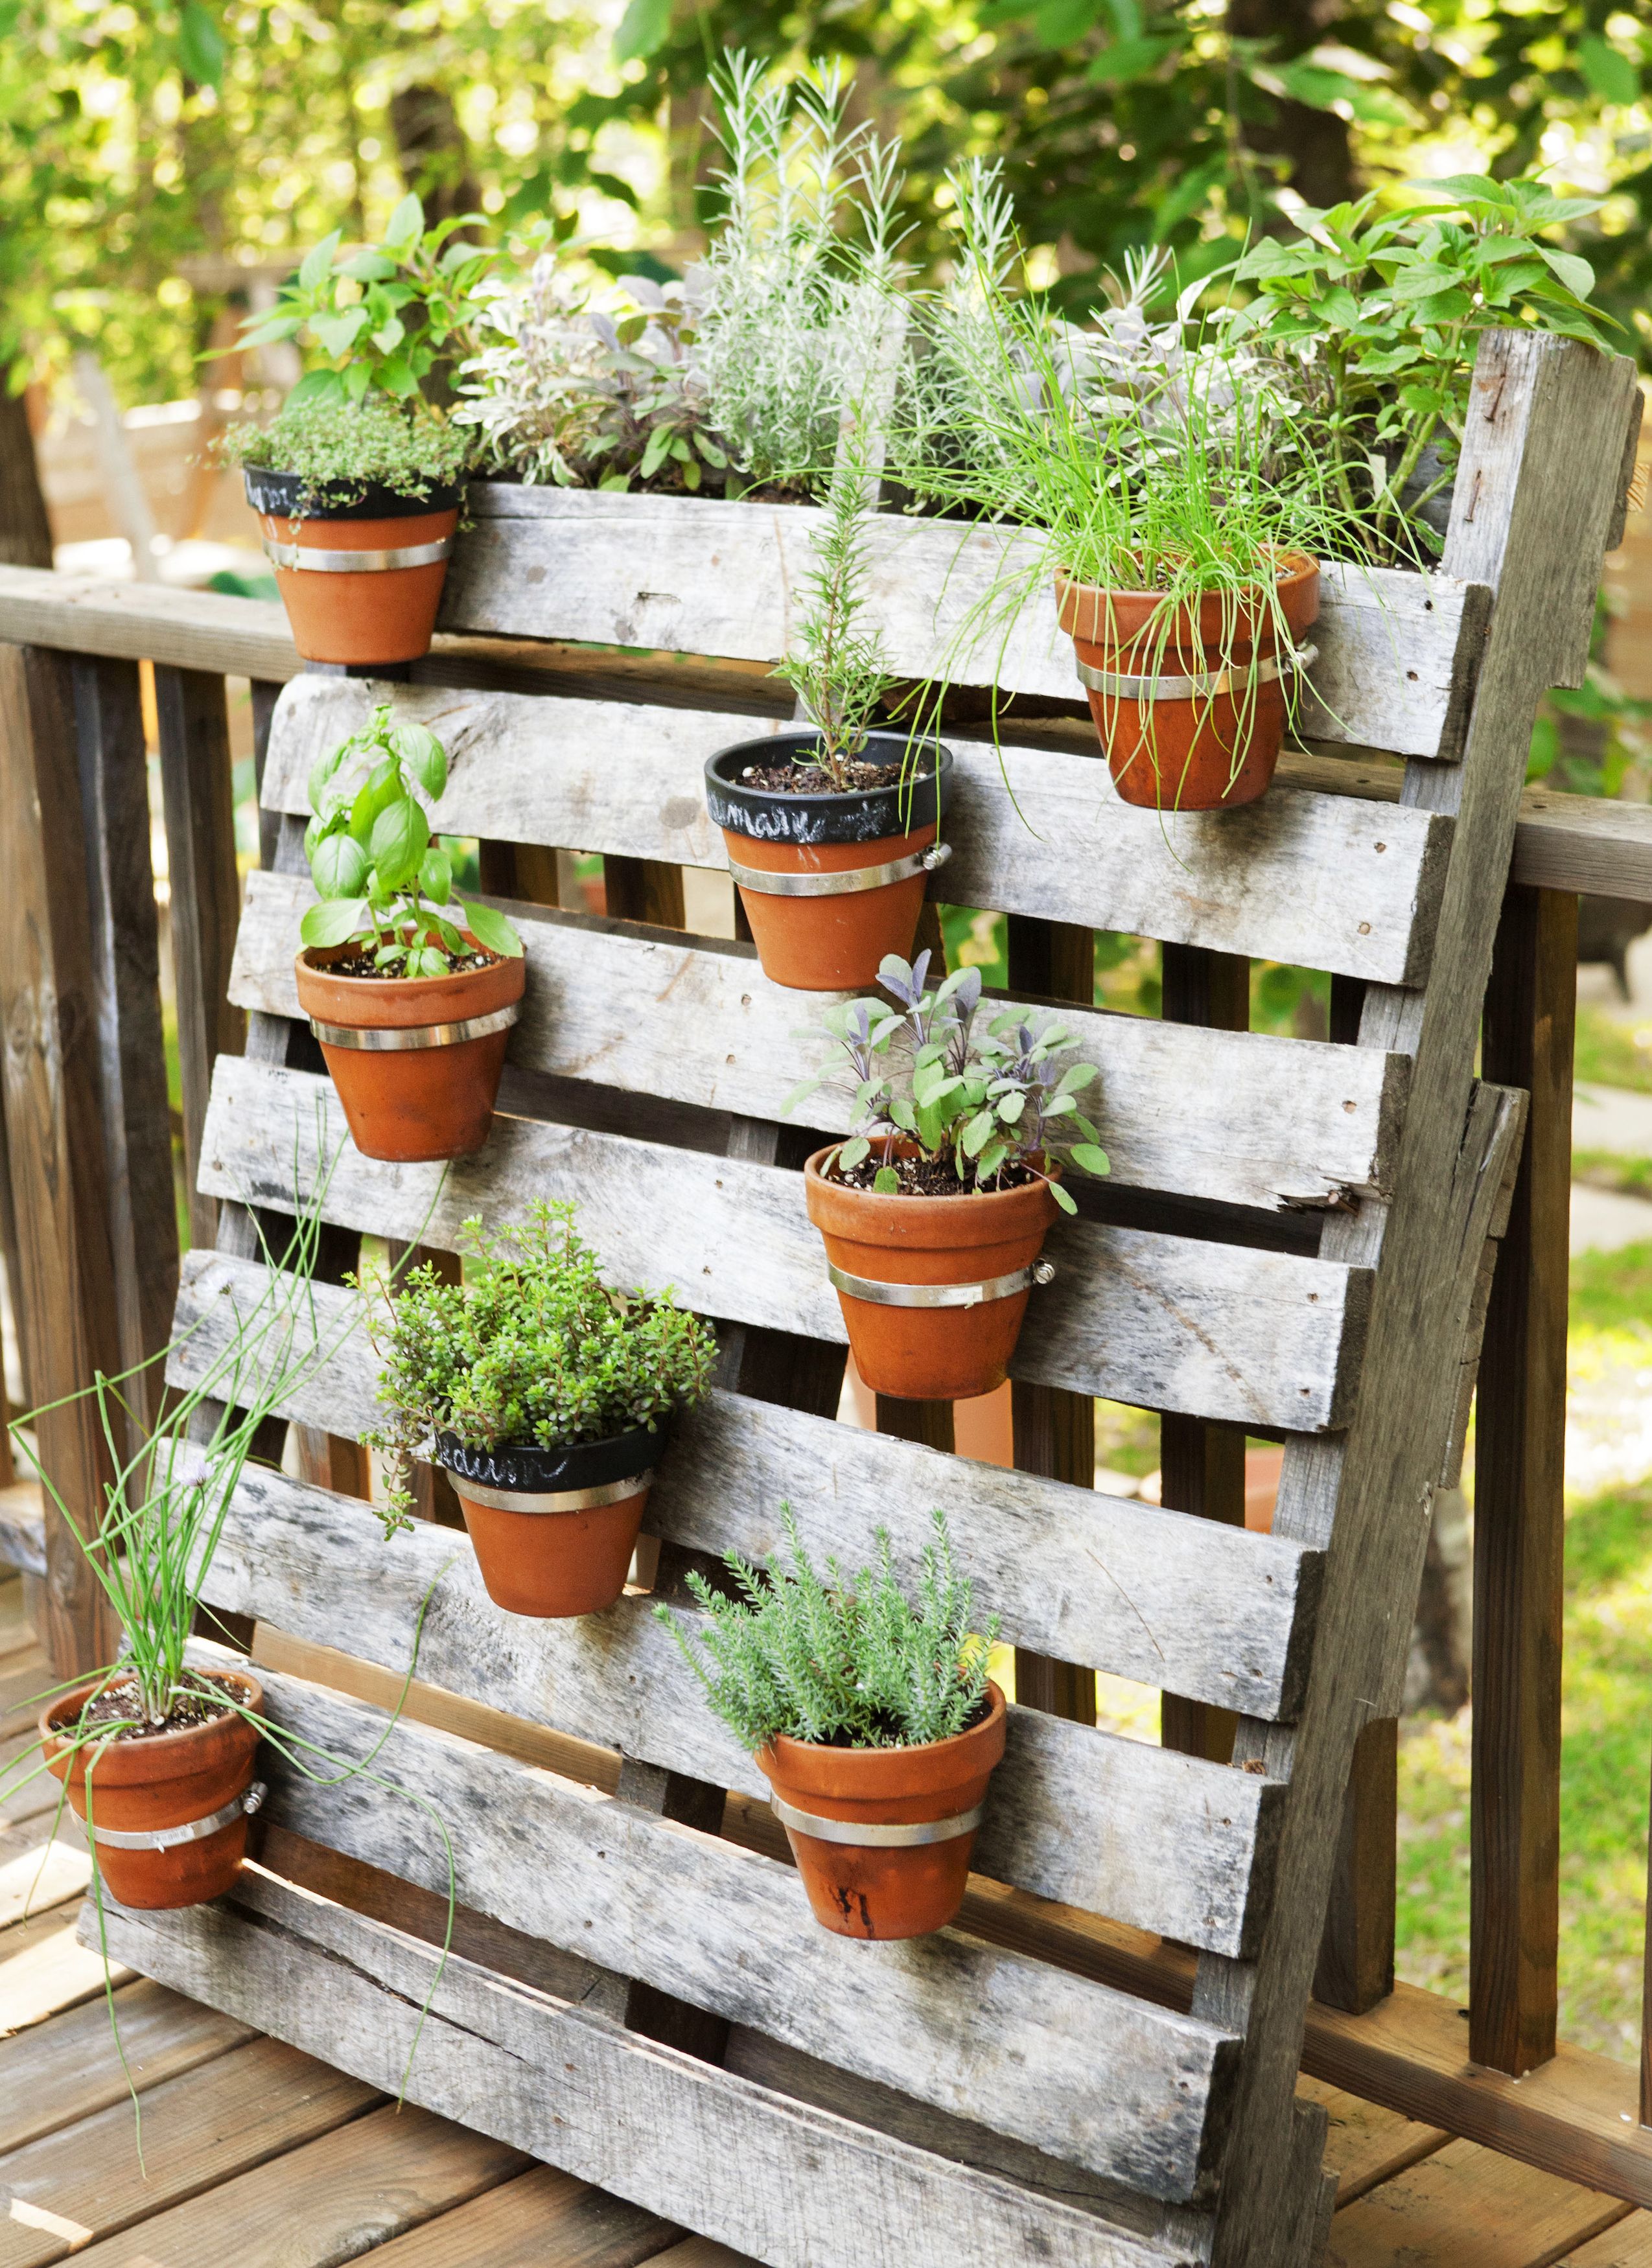 16 container gardening ideas - potted plant ideas we love